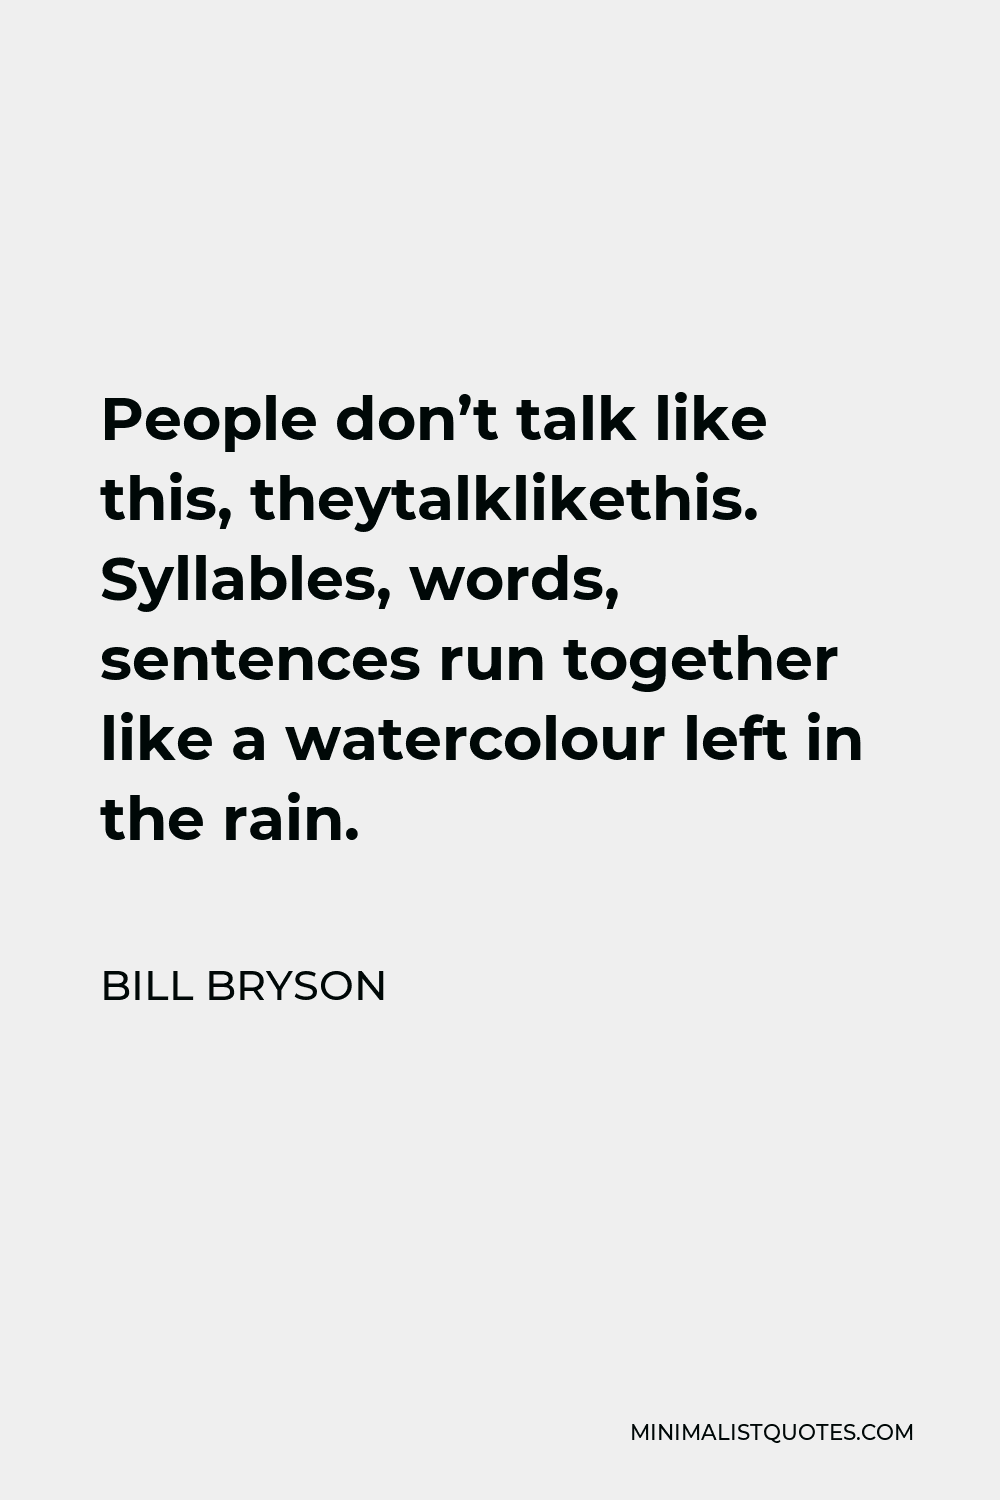 Bill Bryson Quote - People don’t talk like this, theytalklikethis. Syllables, words, sentences run together like a watercolour left in the rain.